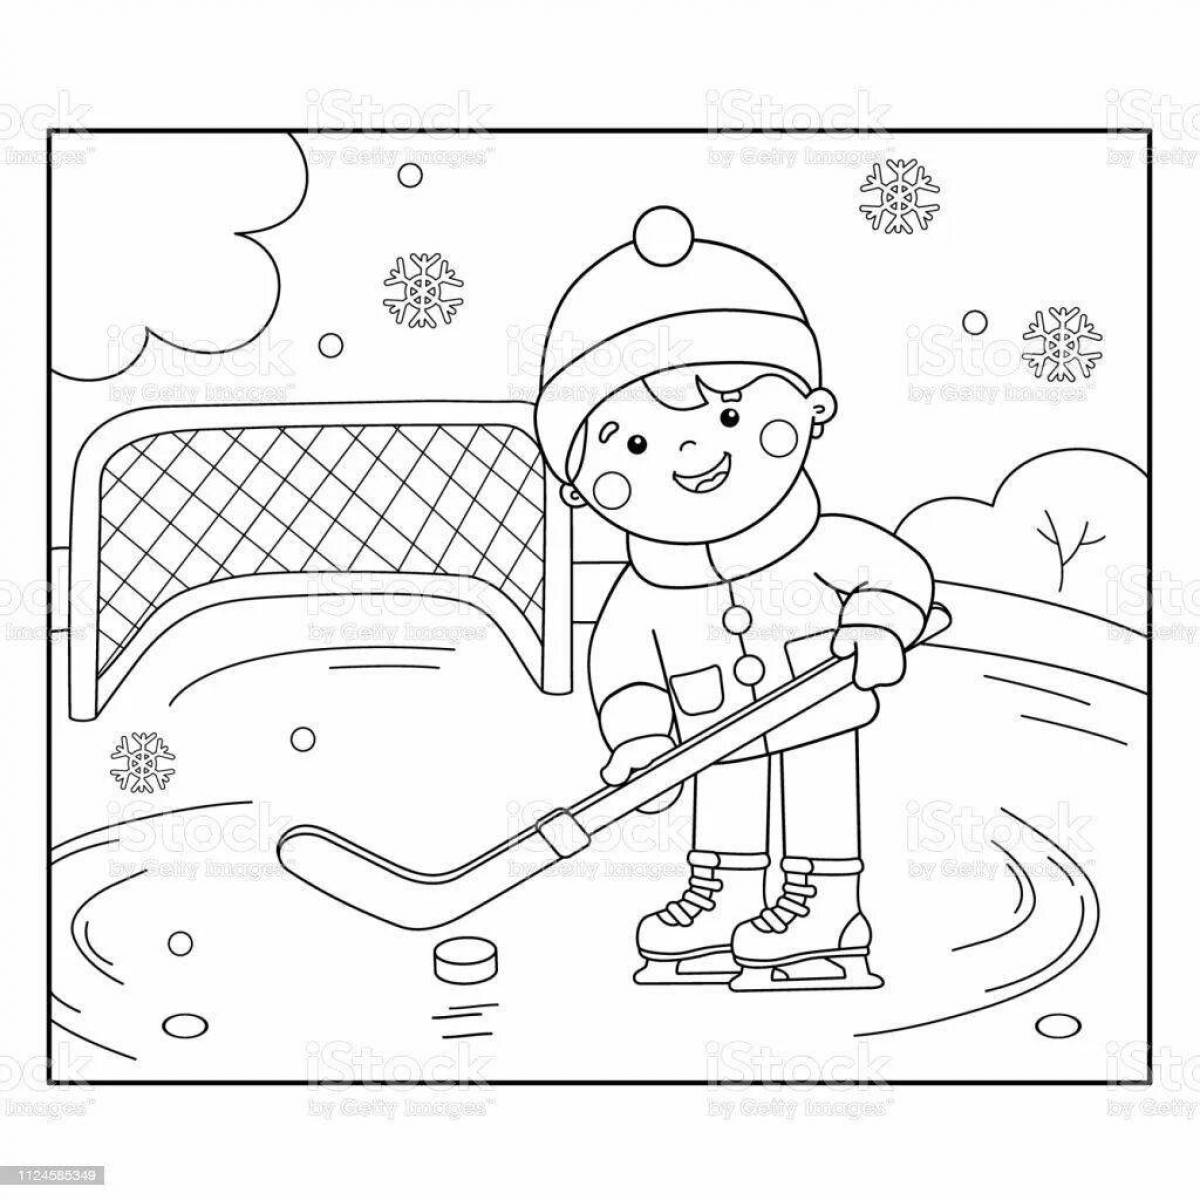 Witty coloring book winter sports for kindergarten